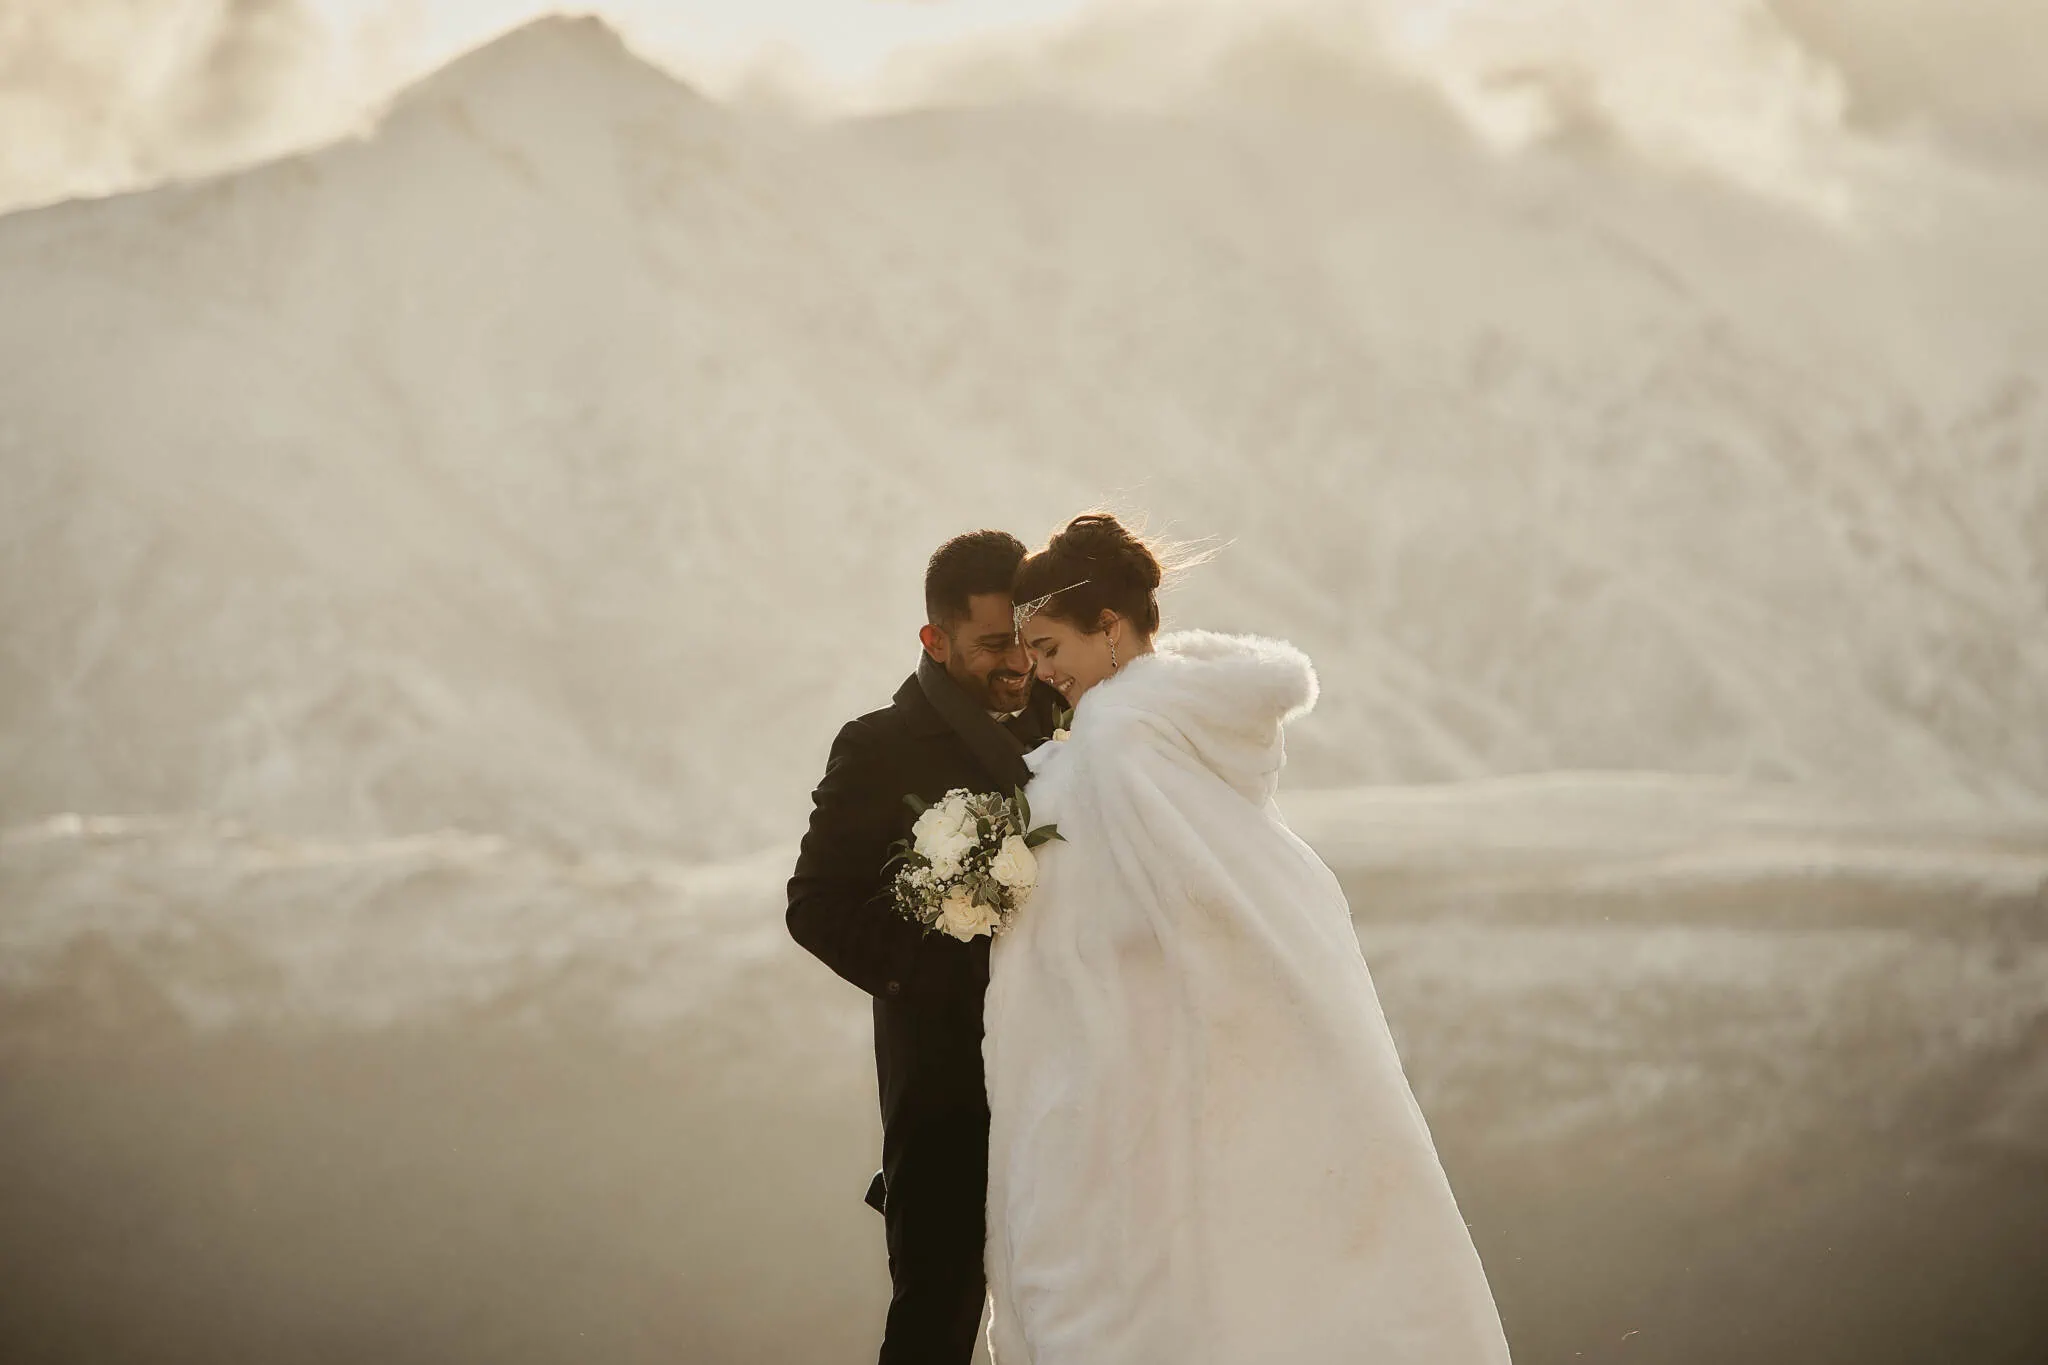 Queenstown New Zealand Elopement Wedding Photographer - Wasim and Yumn, a bride and groom, hugging atop a snowy mountain during their Queenstown Islamic wedding.